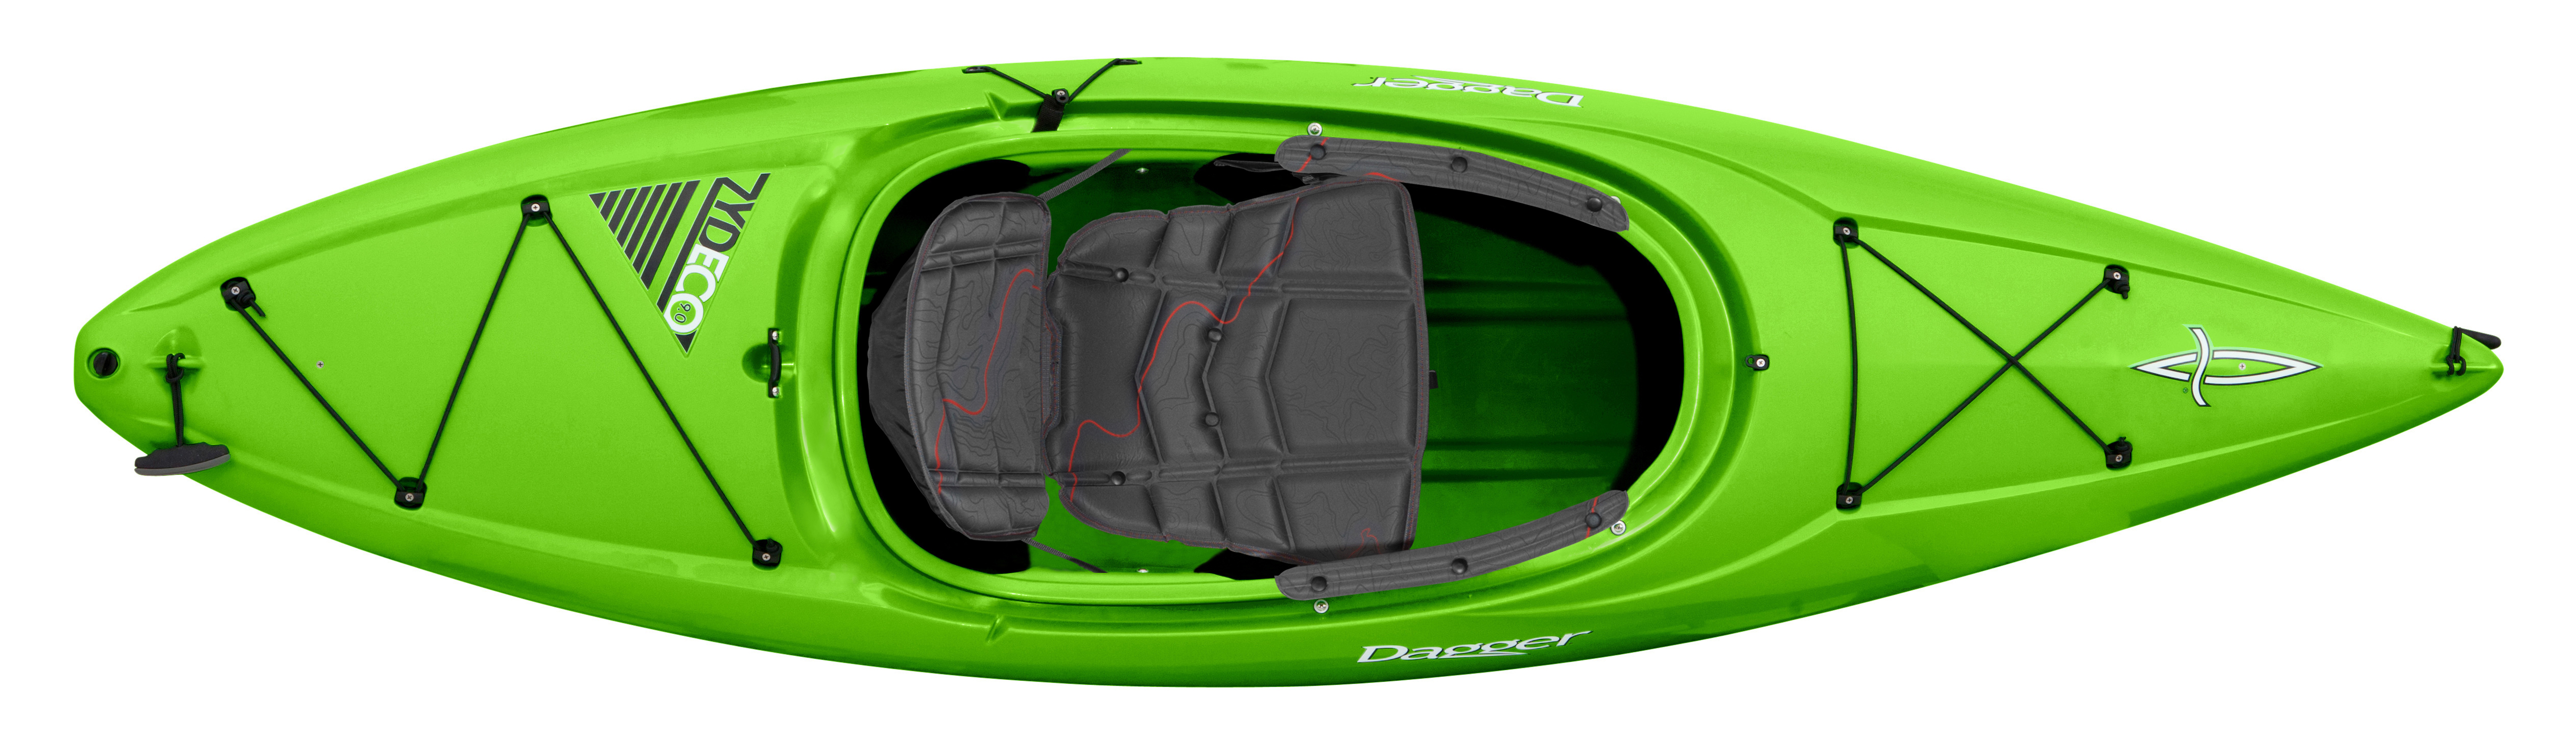 Kayaks: ZYDECO 9.0 by Dagger - Image 2849